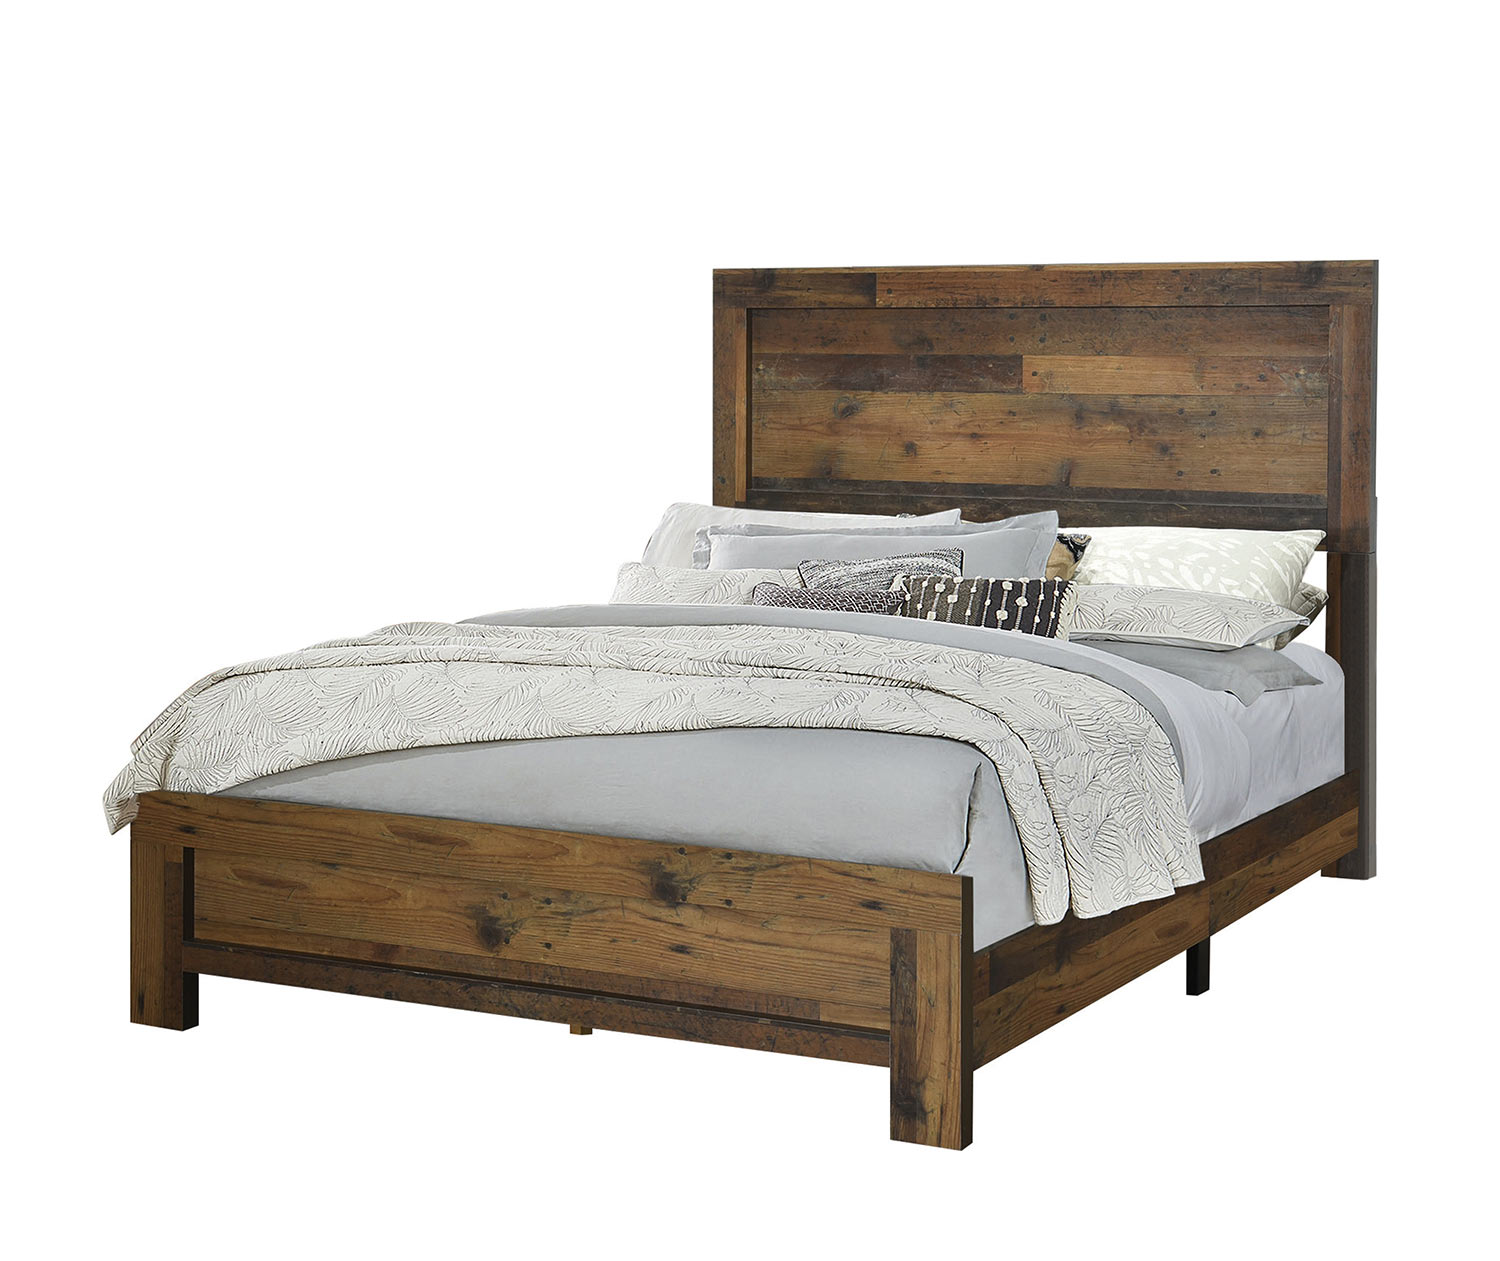 Coaster Sidney Bed - Rustic Pine